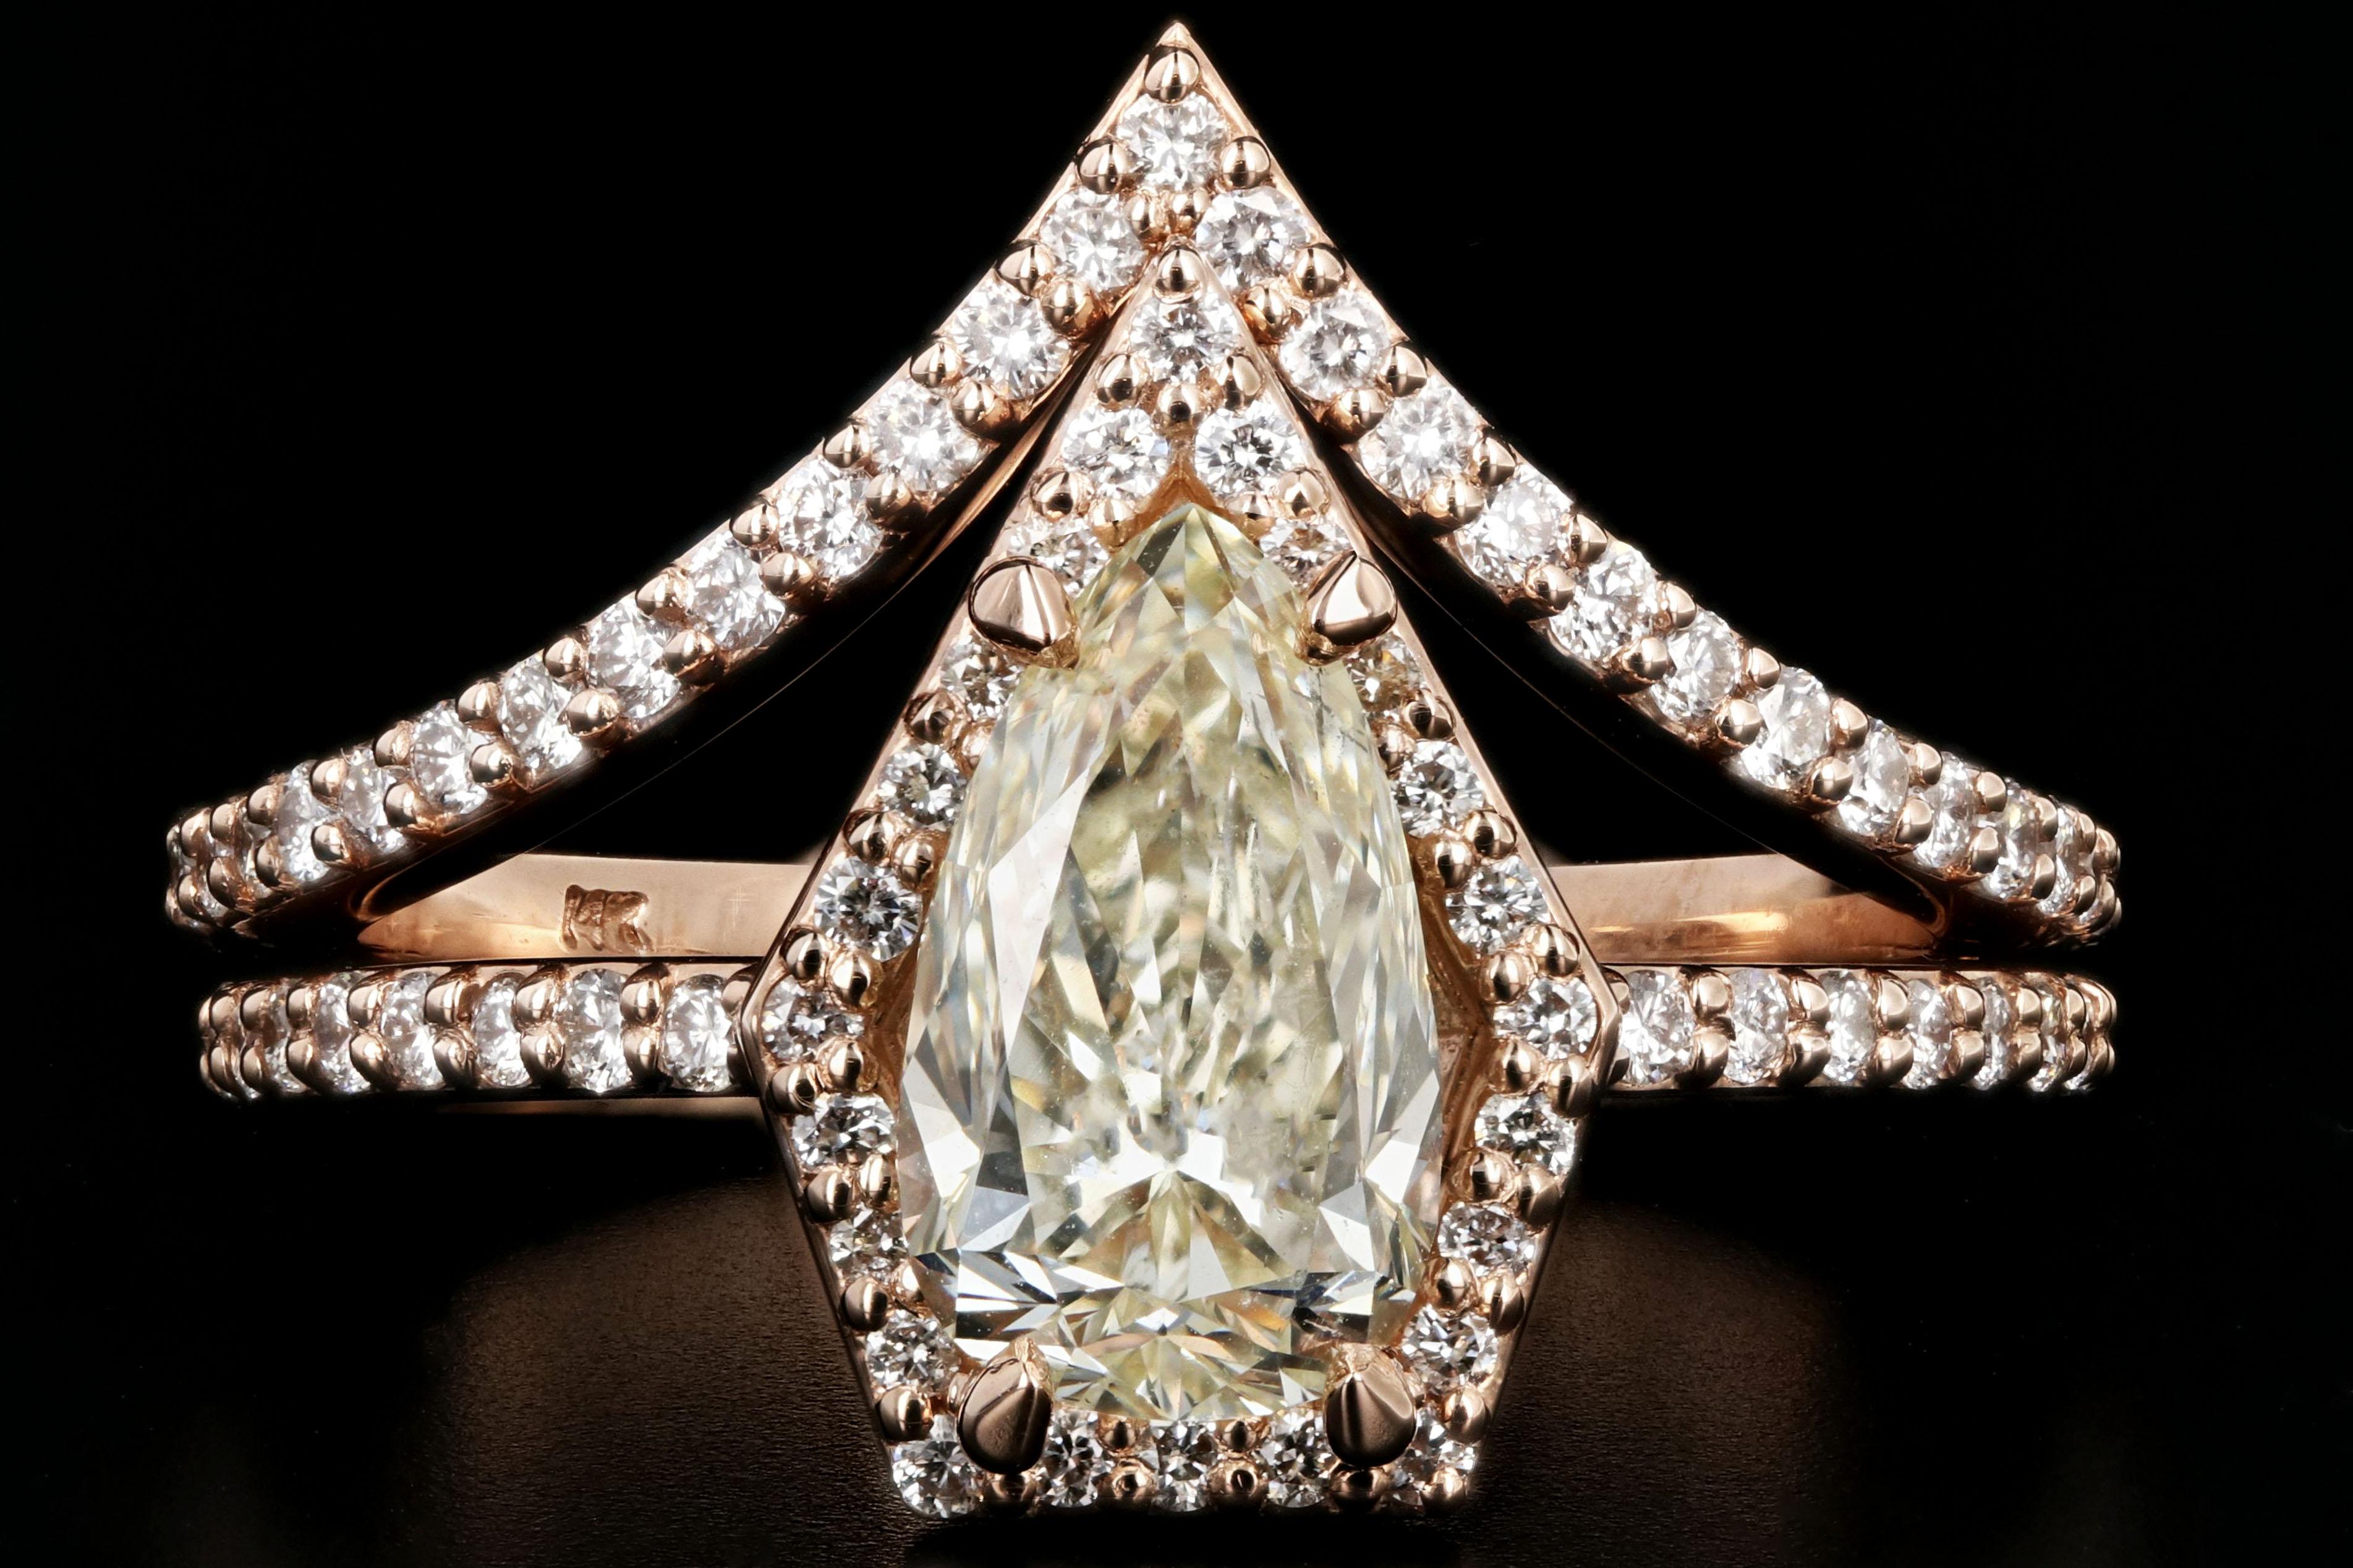 Era: New

Composition: 14K Rose Gold

Primary Stone: Pear Shaped Diamond

Stone Carat: 1.56 carats

Color / Clarity: N/ SI2

GIA Certification Number: 1206131926

Accent Stone:  Round Brilliant Cut Diamonds

Color/Clarity: I/J- SI1/2

Accent Diamond